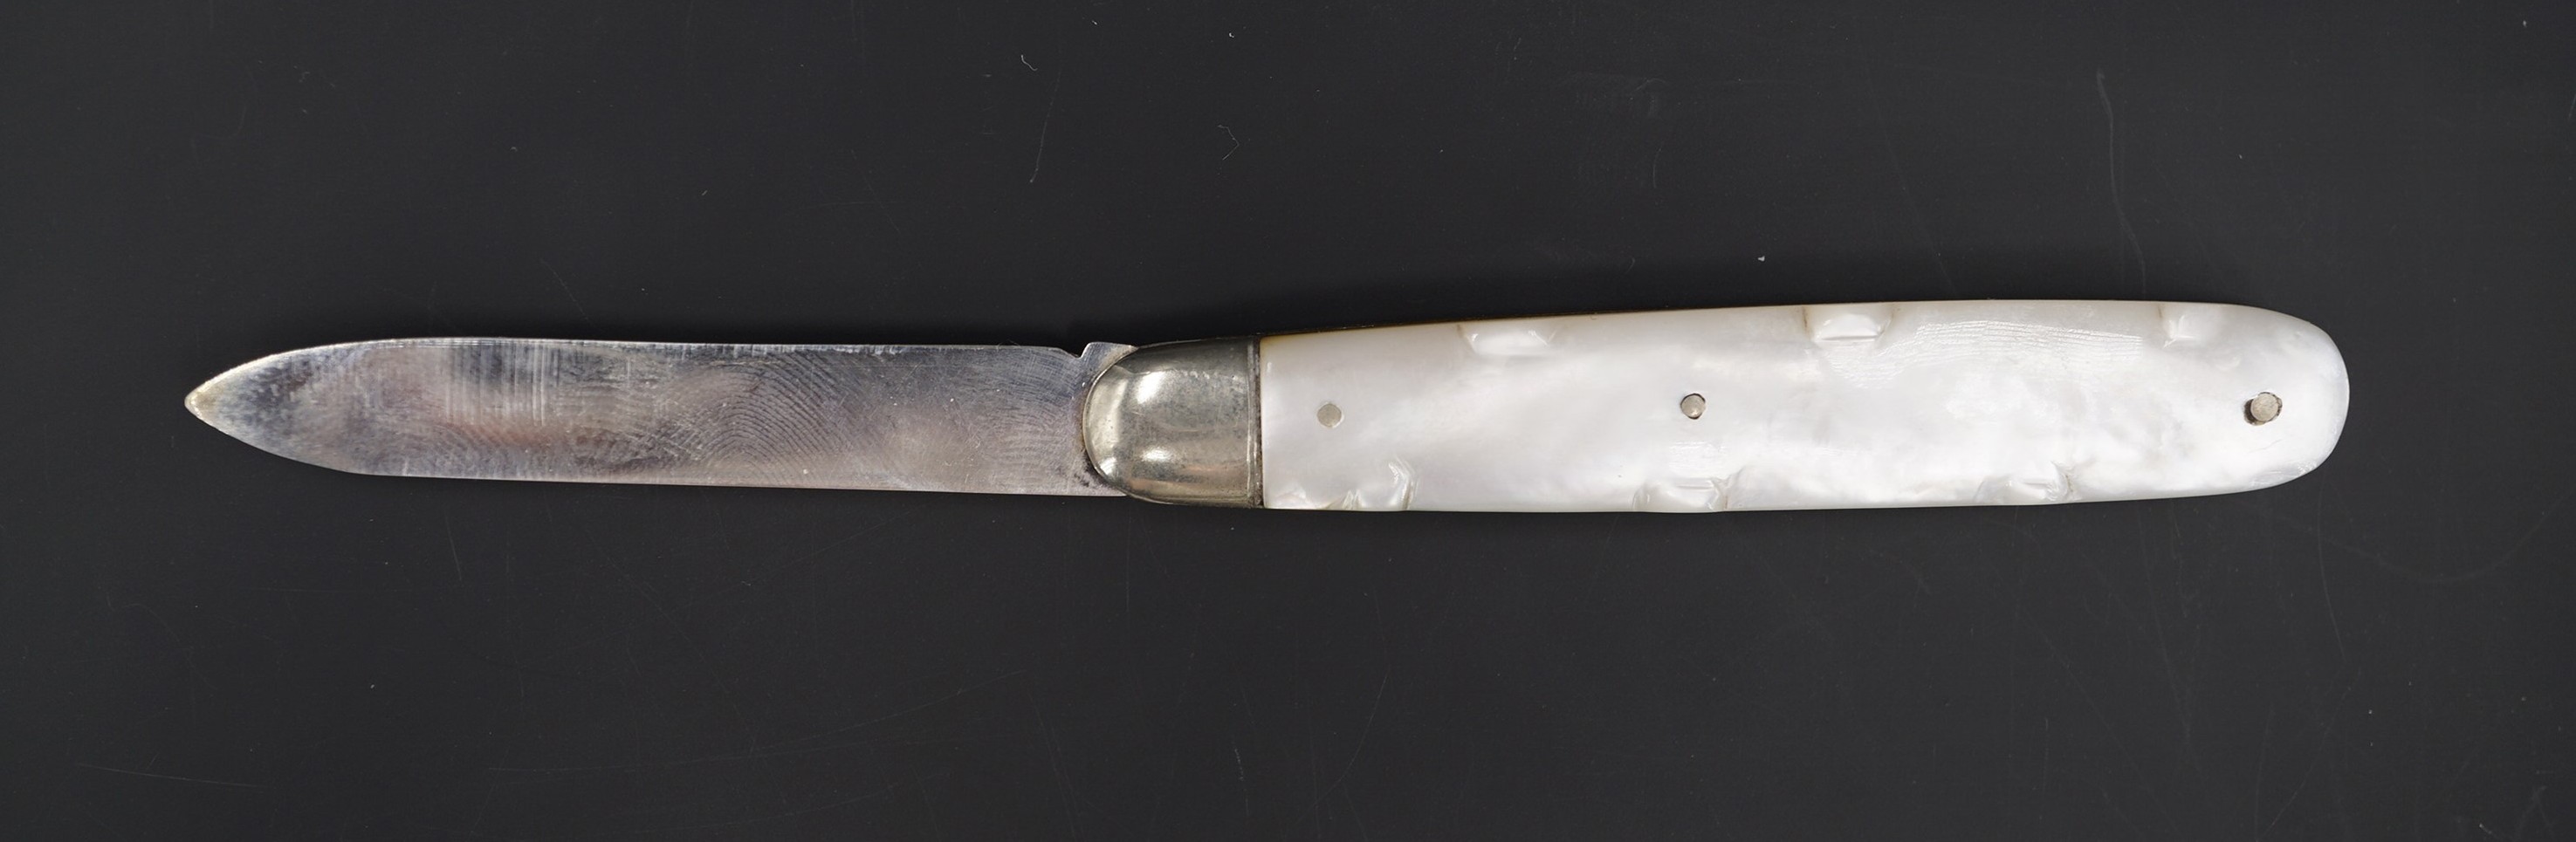 An Edwardian silver mother-of-pearl handled fruit knife, Hilliard & Thomason, Sheffield, 1904, 18 g, - Image 4 of 4